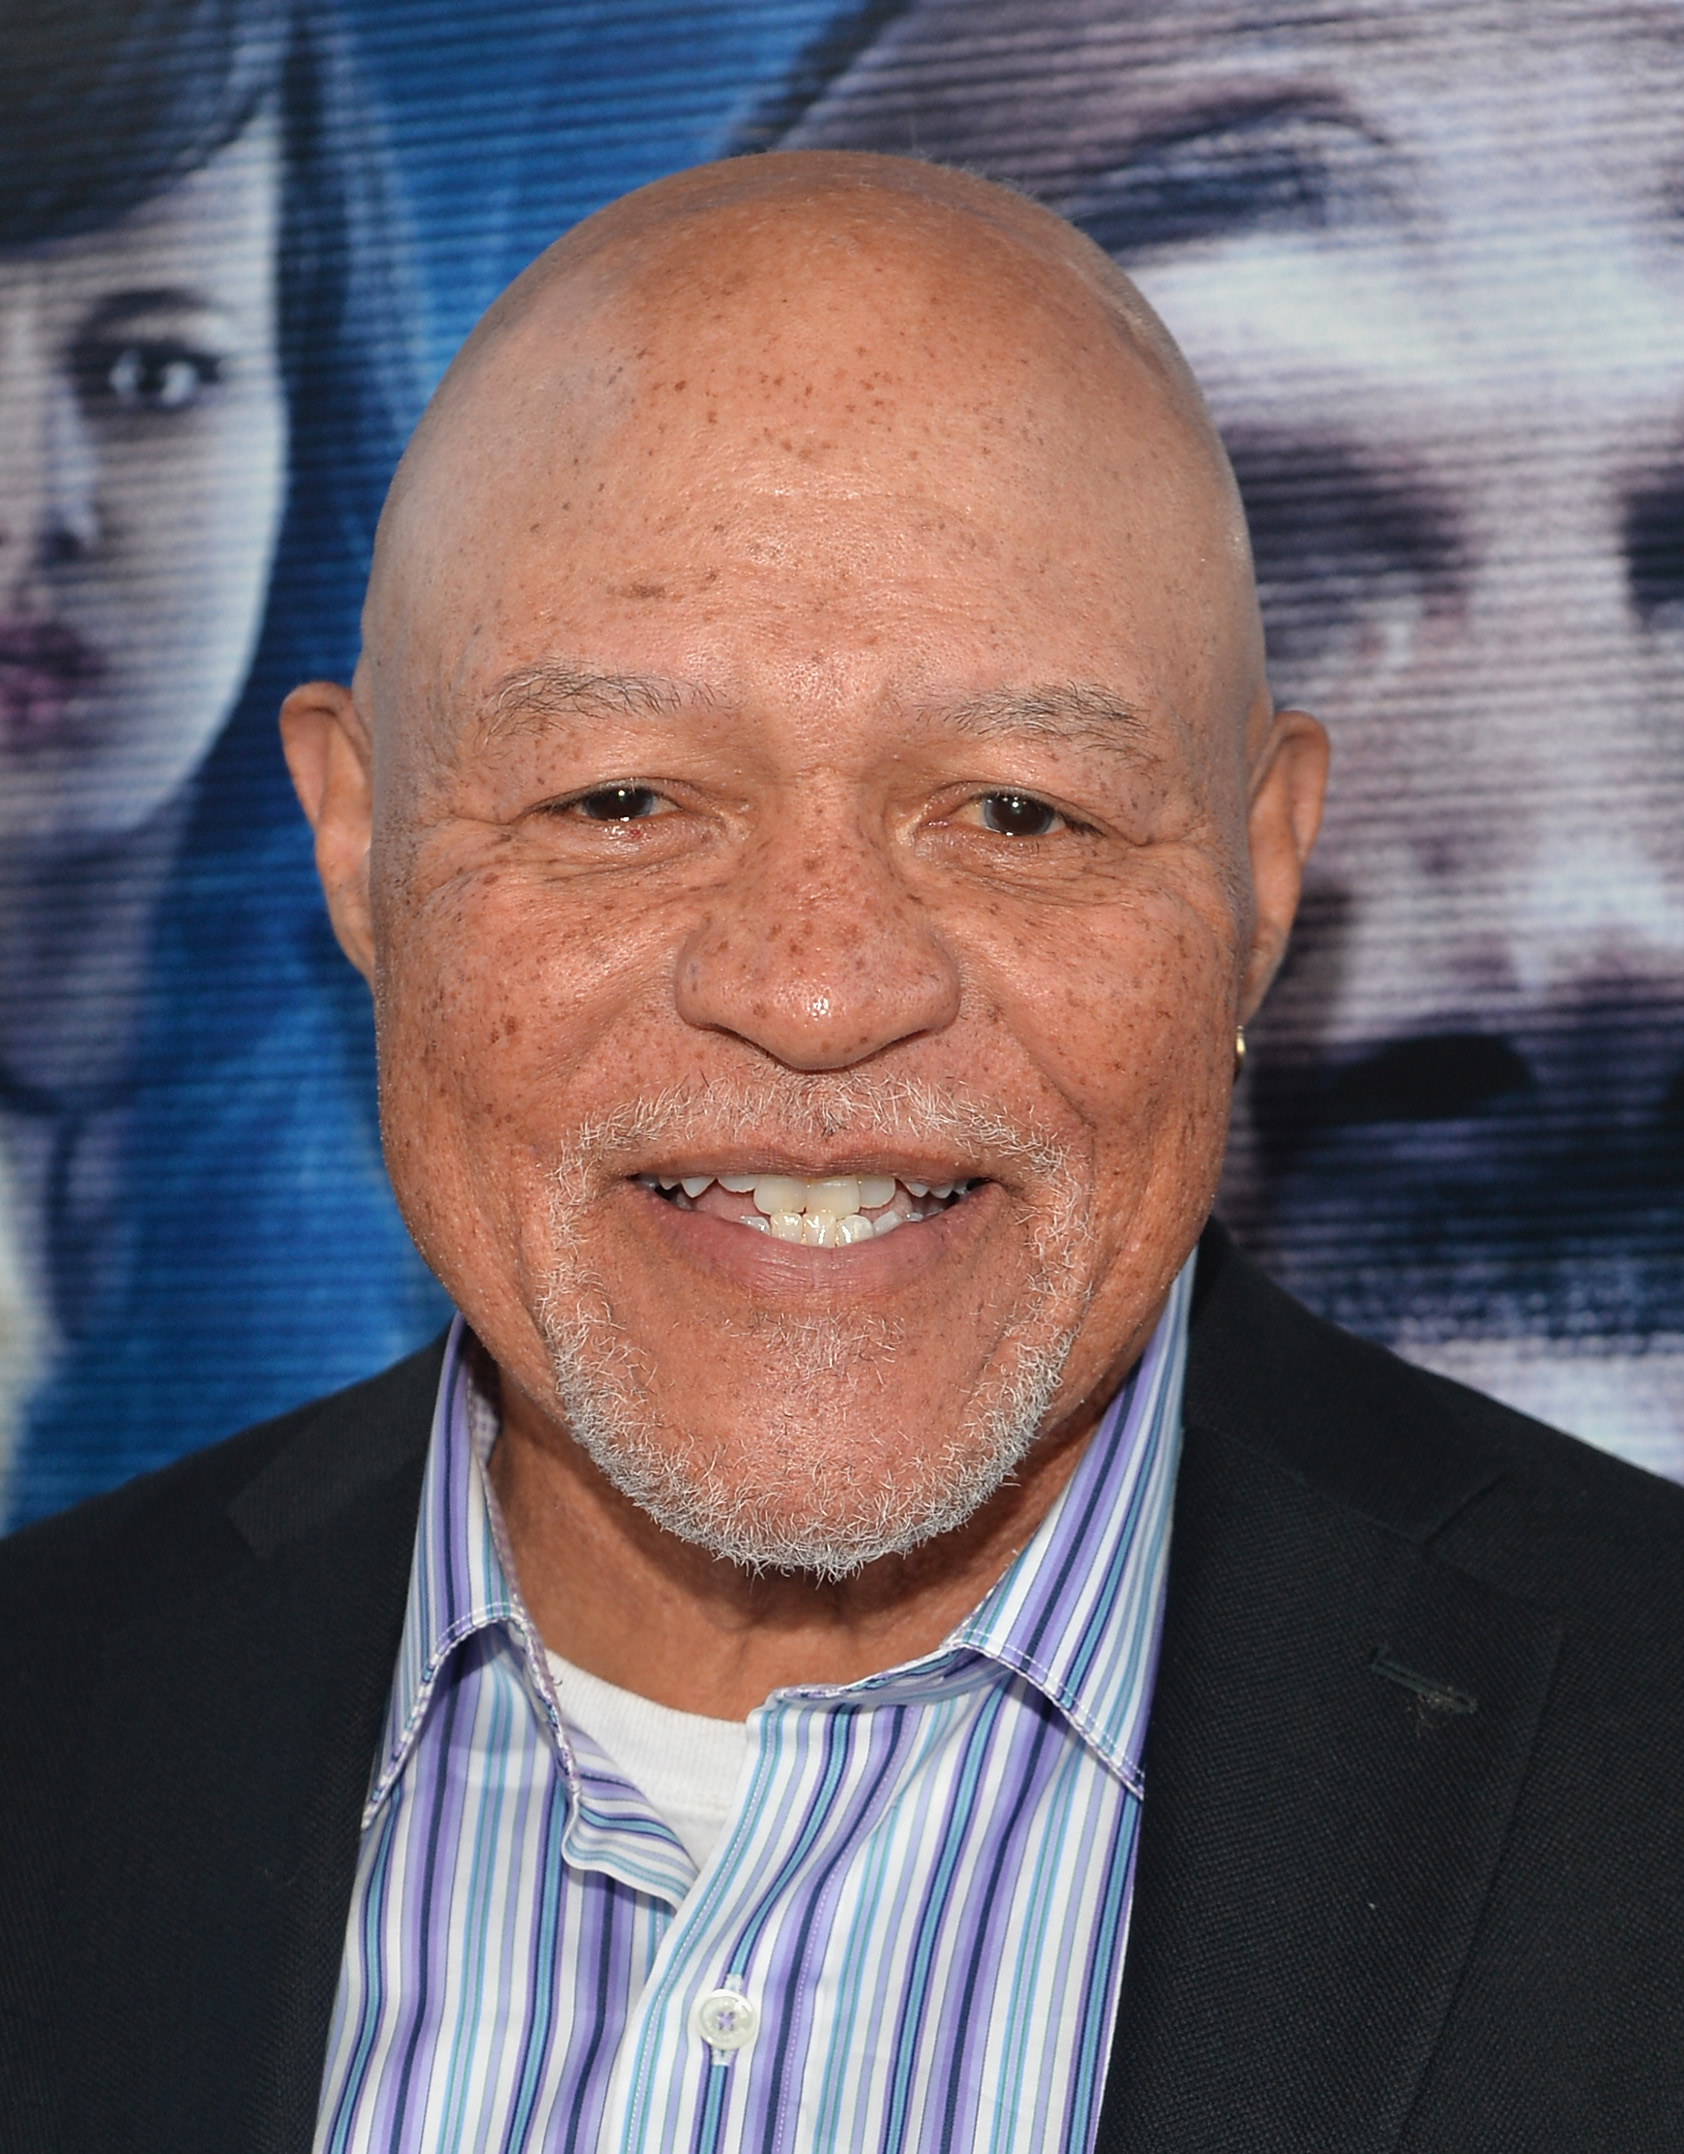 John Beasley  at the premiere of "A Haunted House 2" on April 16, 2014, in Los Angeles, California. | Source: Getty Images